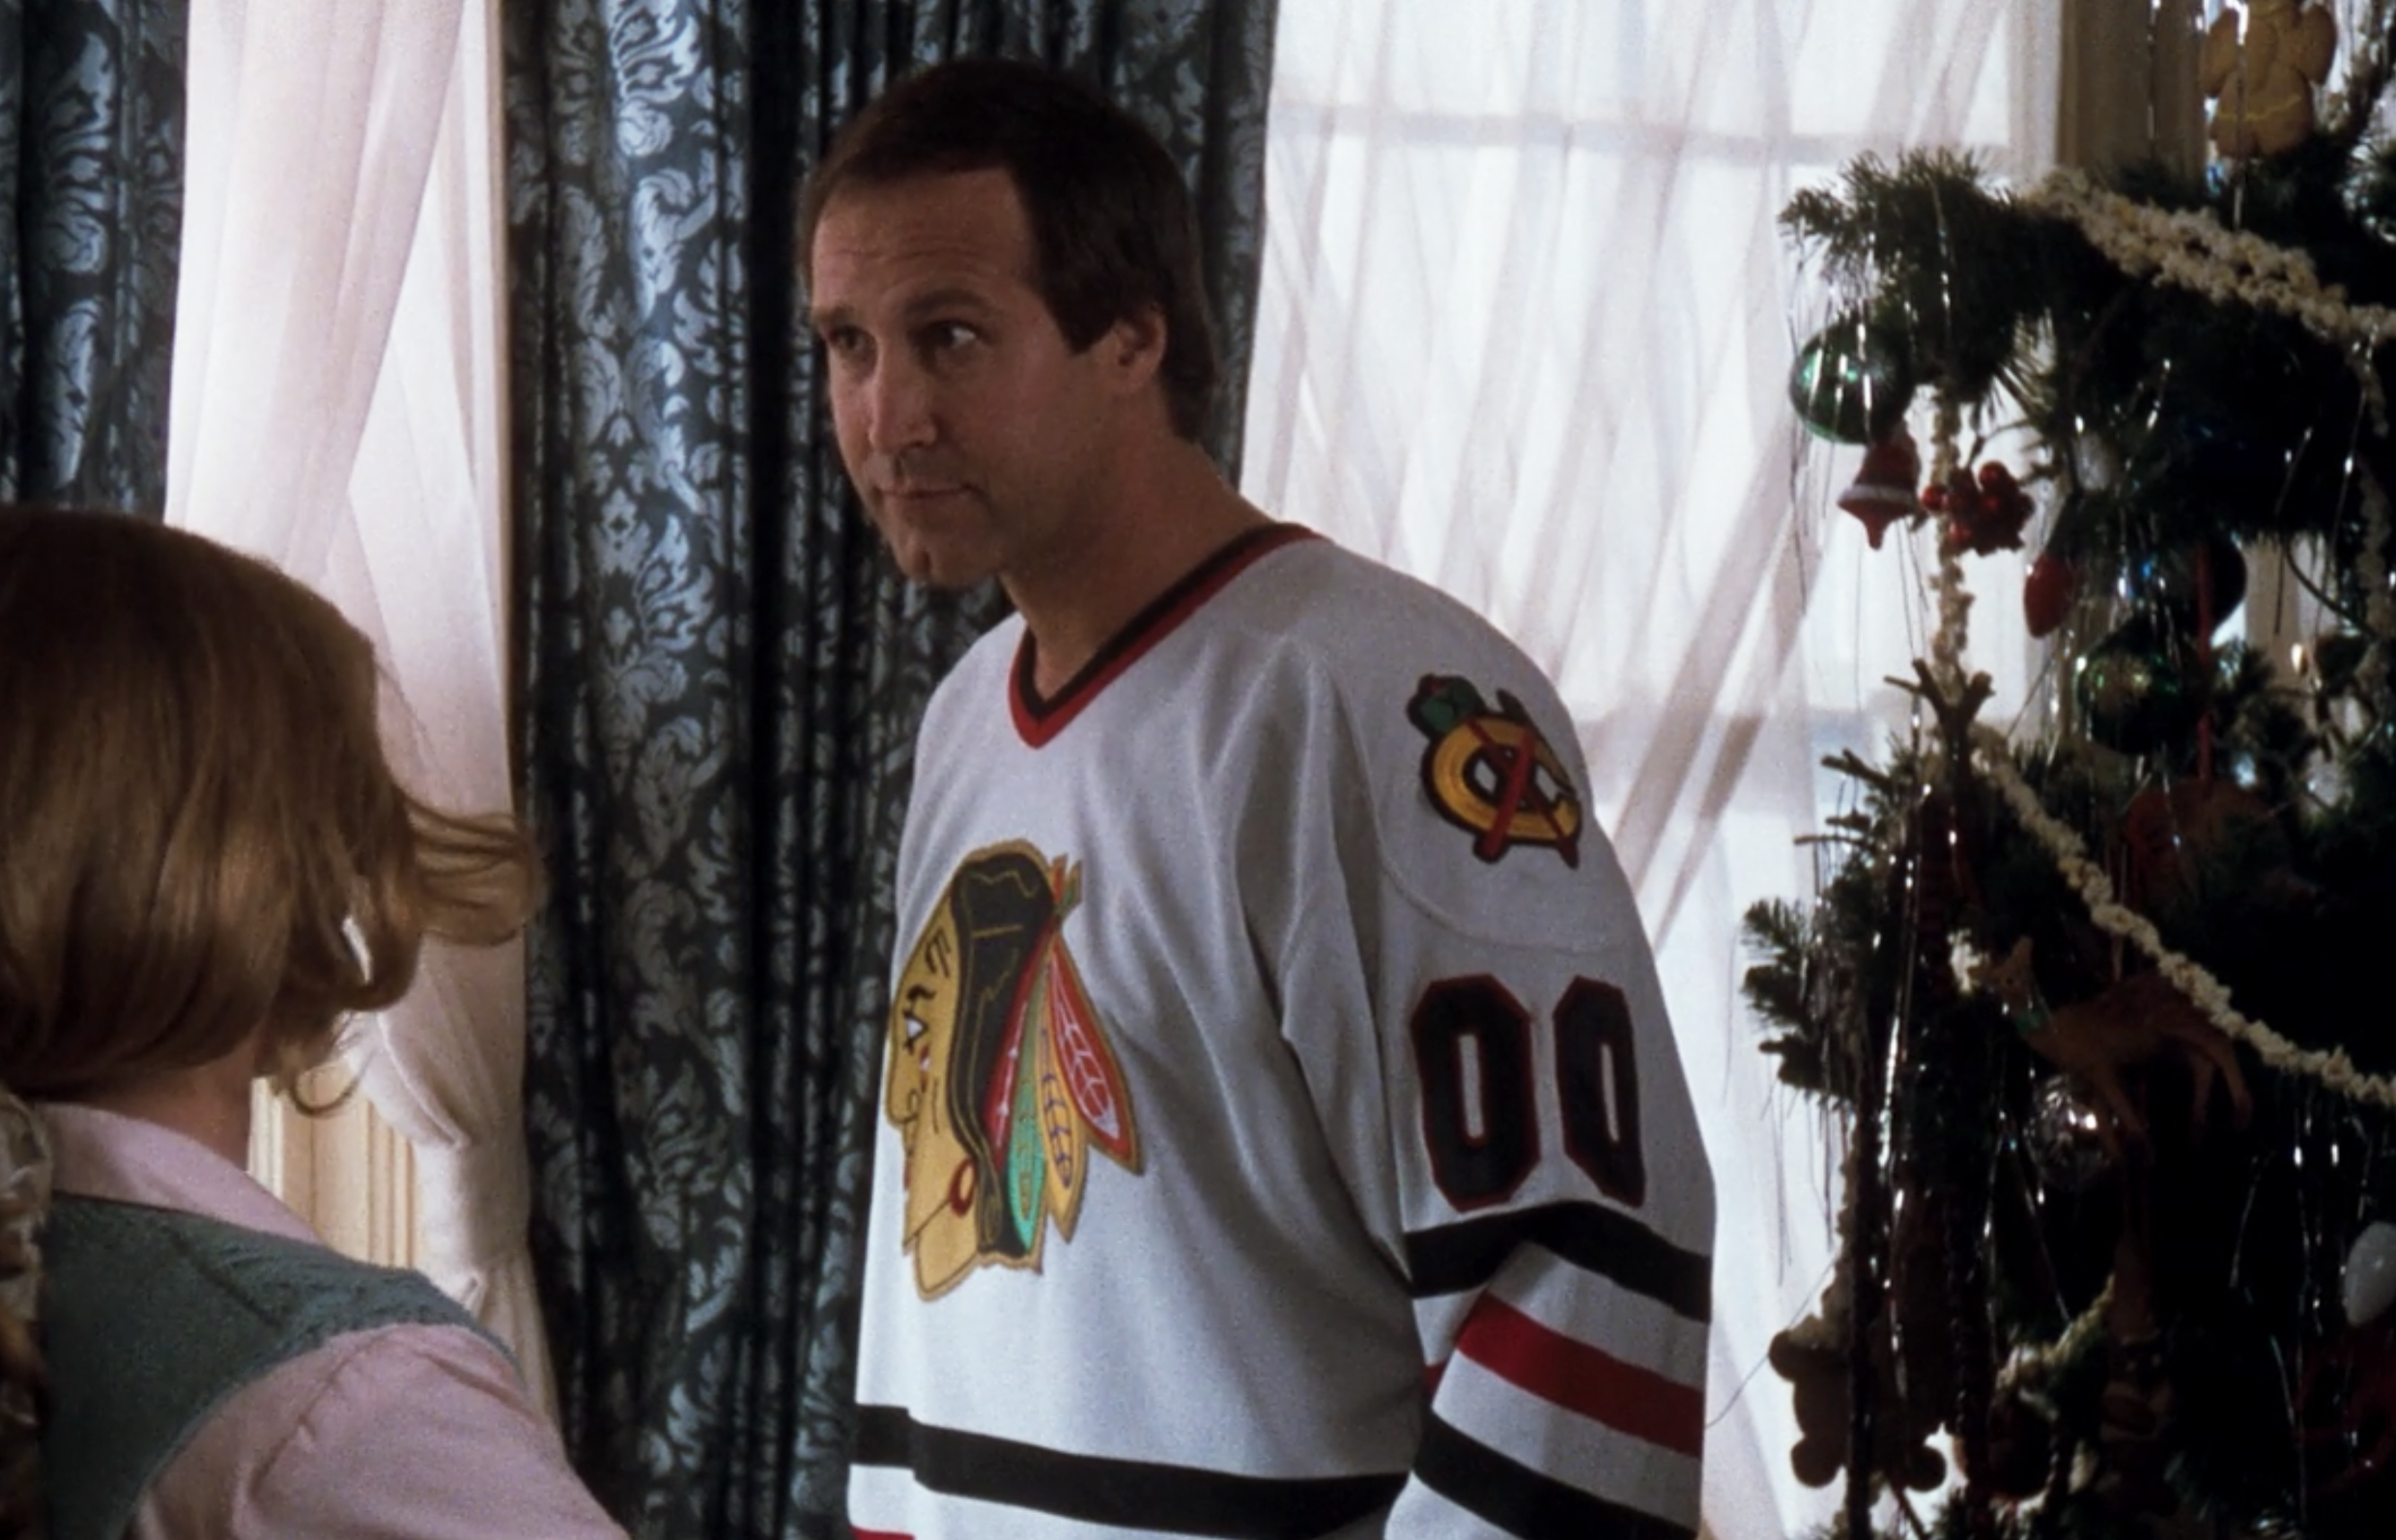 Clark Griswold Christmas Vacation Chicago Blackhawks Hockey Jersey Review 